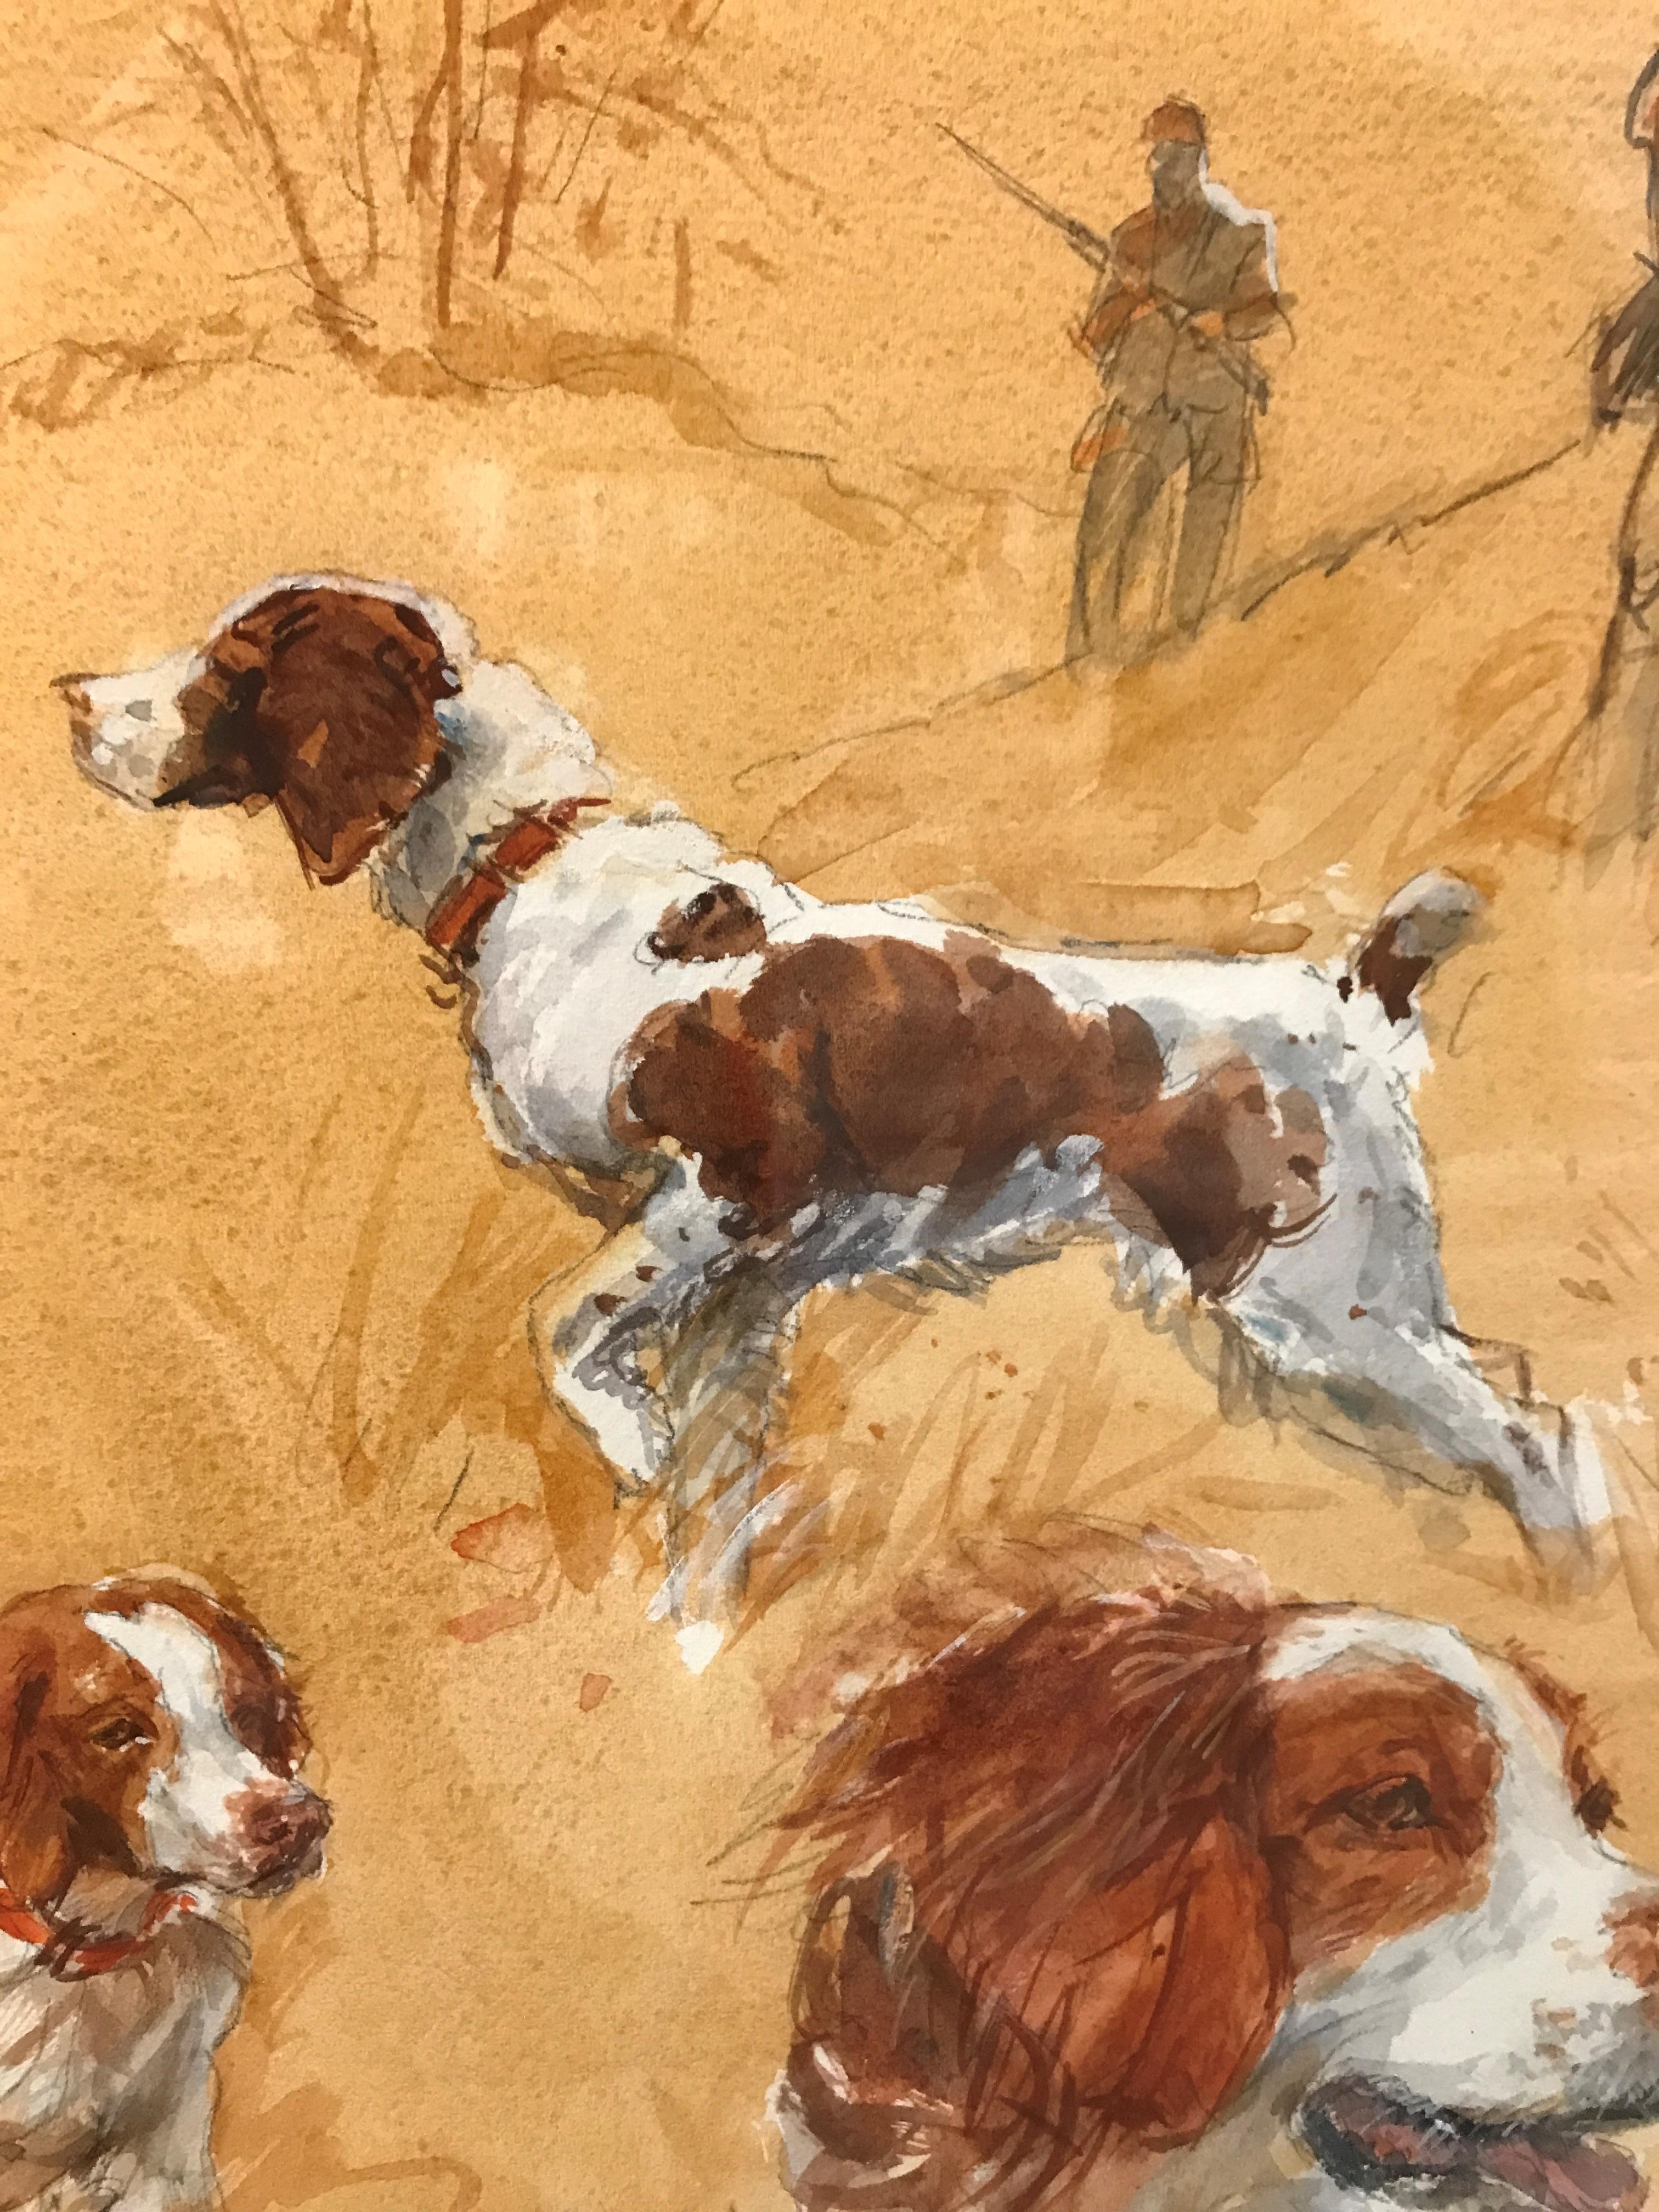 The Contemporary Vignette of a Hunter and his Brittany Spaniel's Day in the Field – Painting von Sandra Oppegard